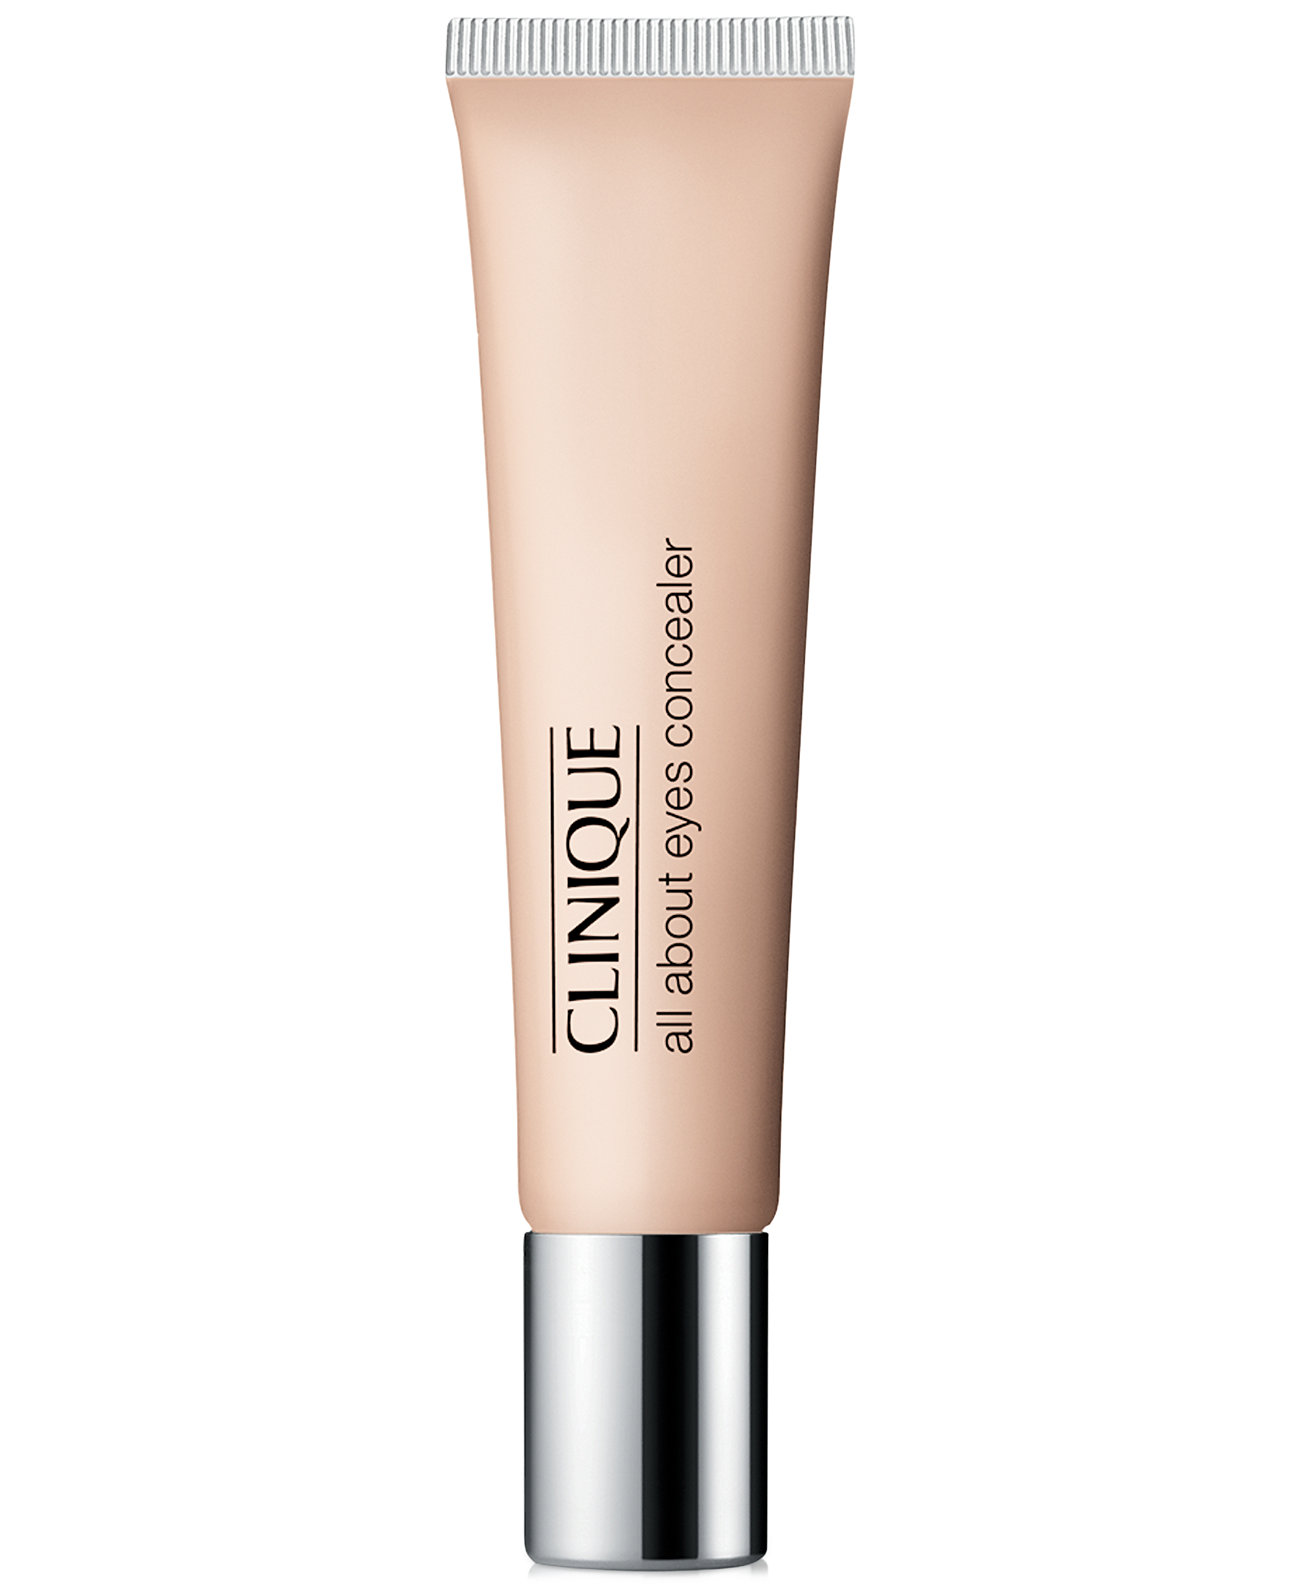 All About Eyes Concealer, .37 унций Clinique